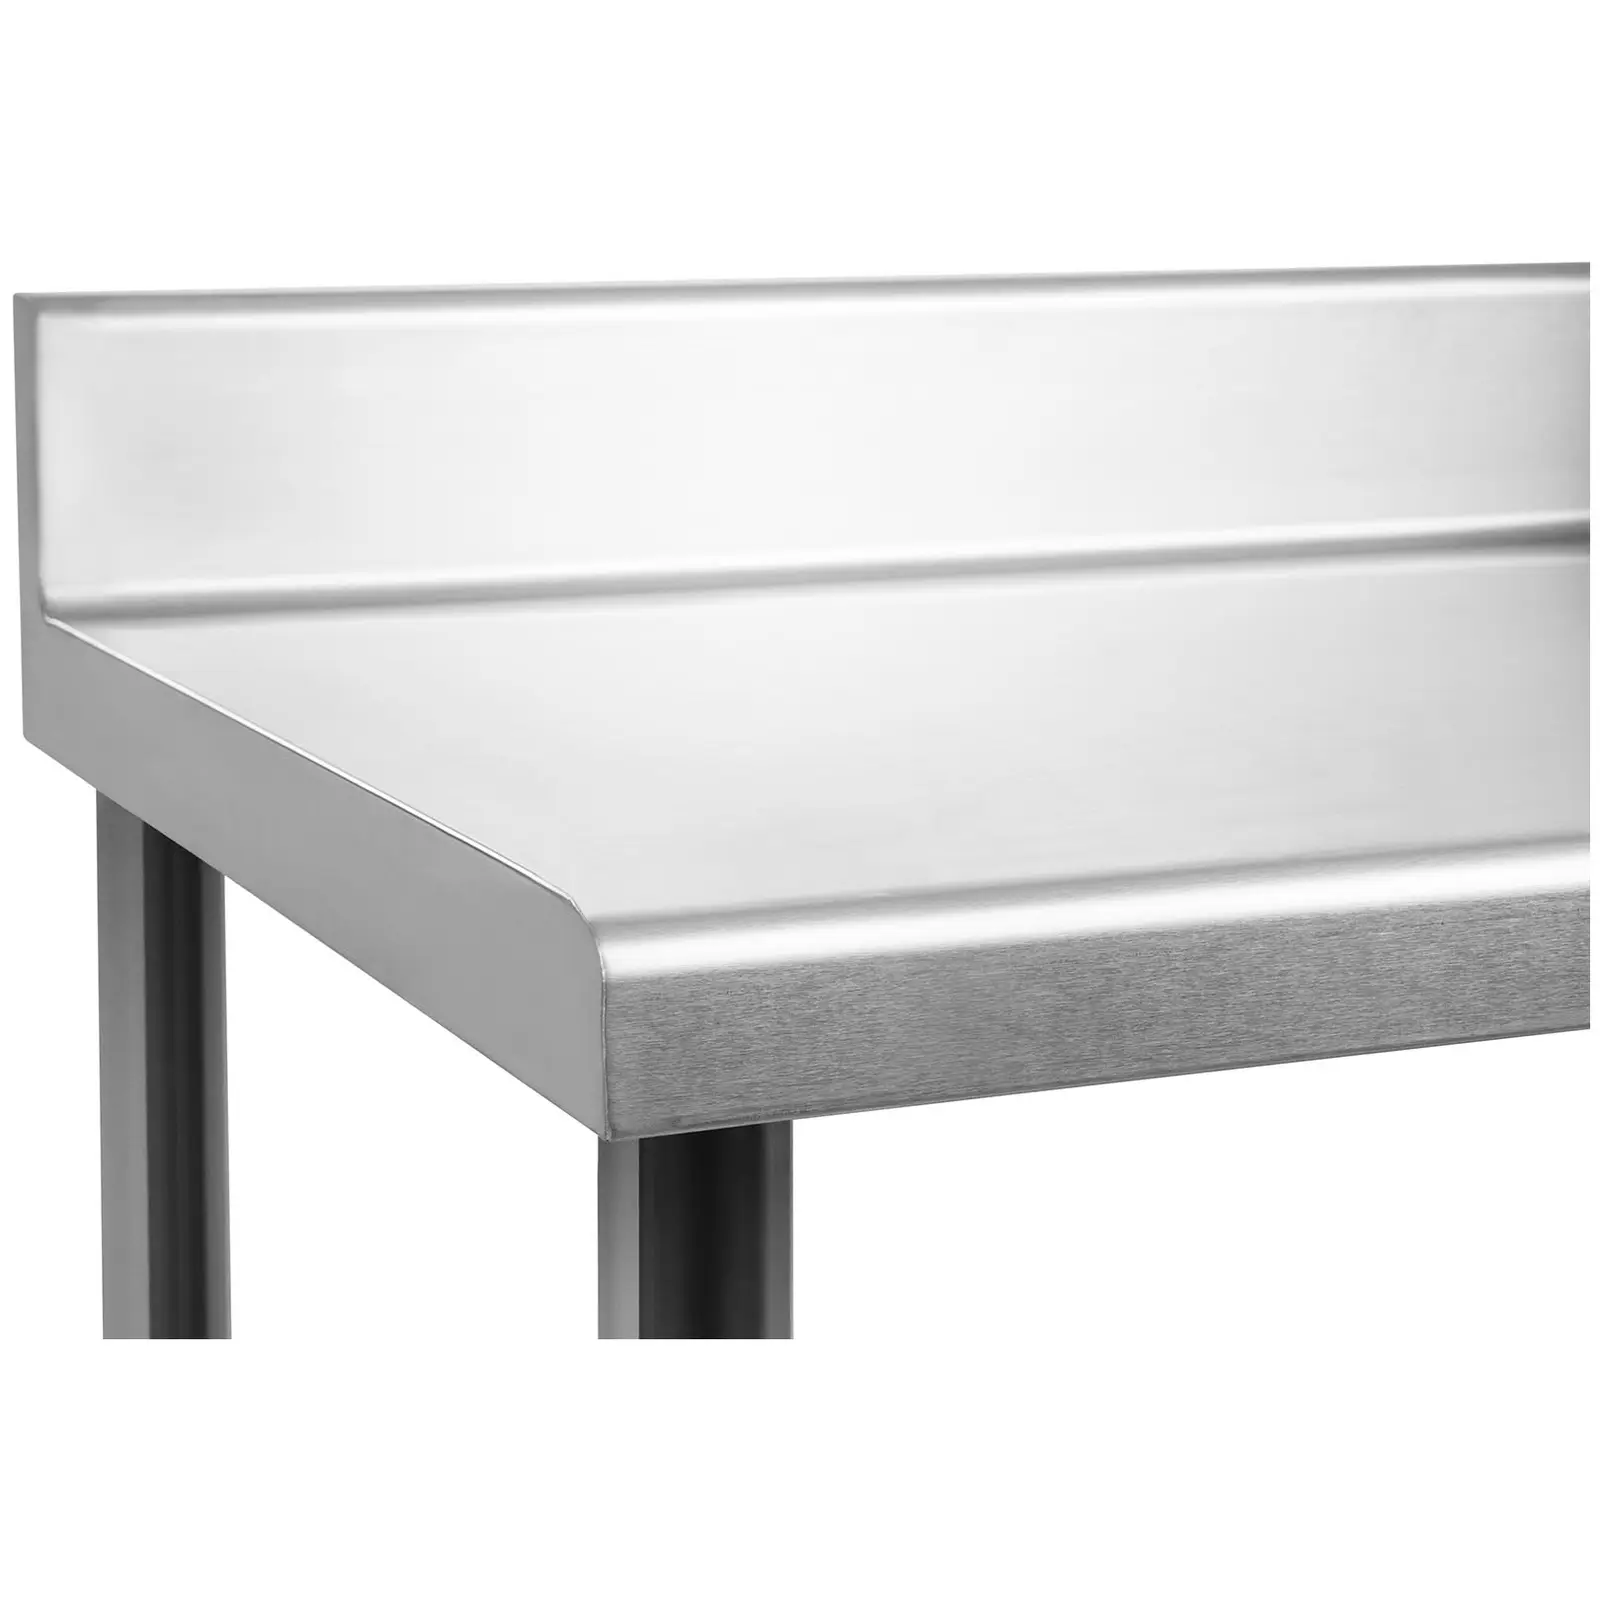 Stainless Steel Table - 100 x 70 cm - Upstand - 95 kg capacity